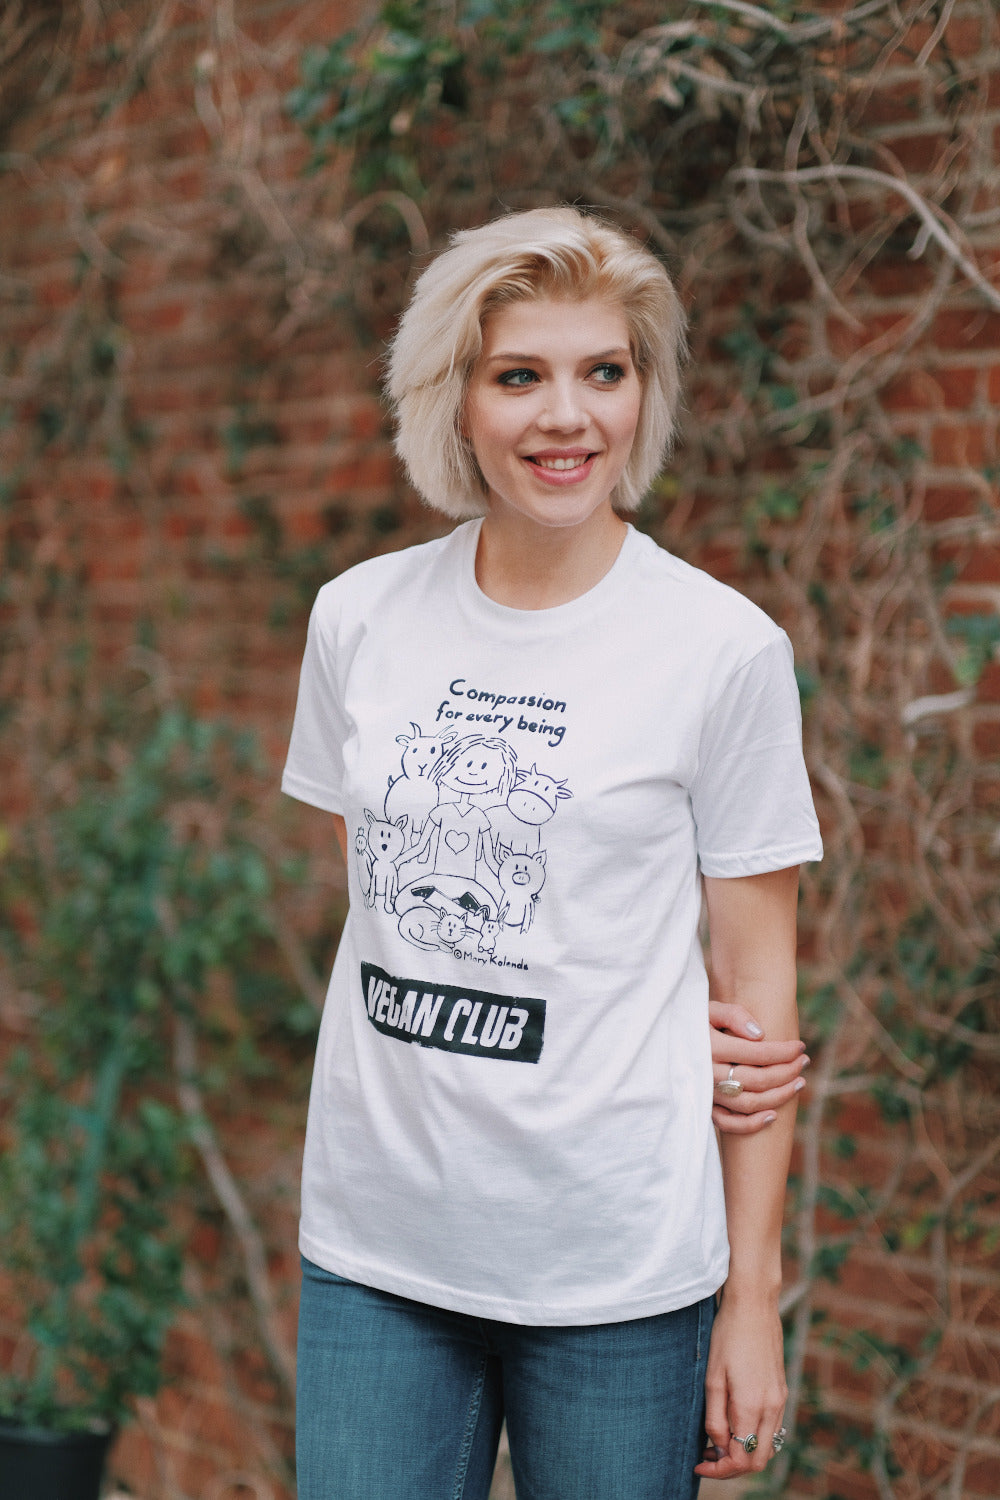 Vegan Club T-shirt feat. Mary Kolende's "Compassion for Every Being"